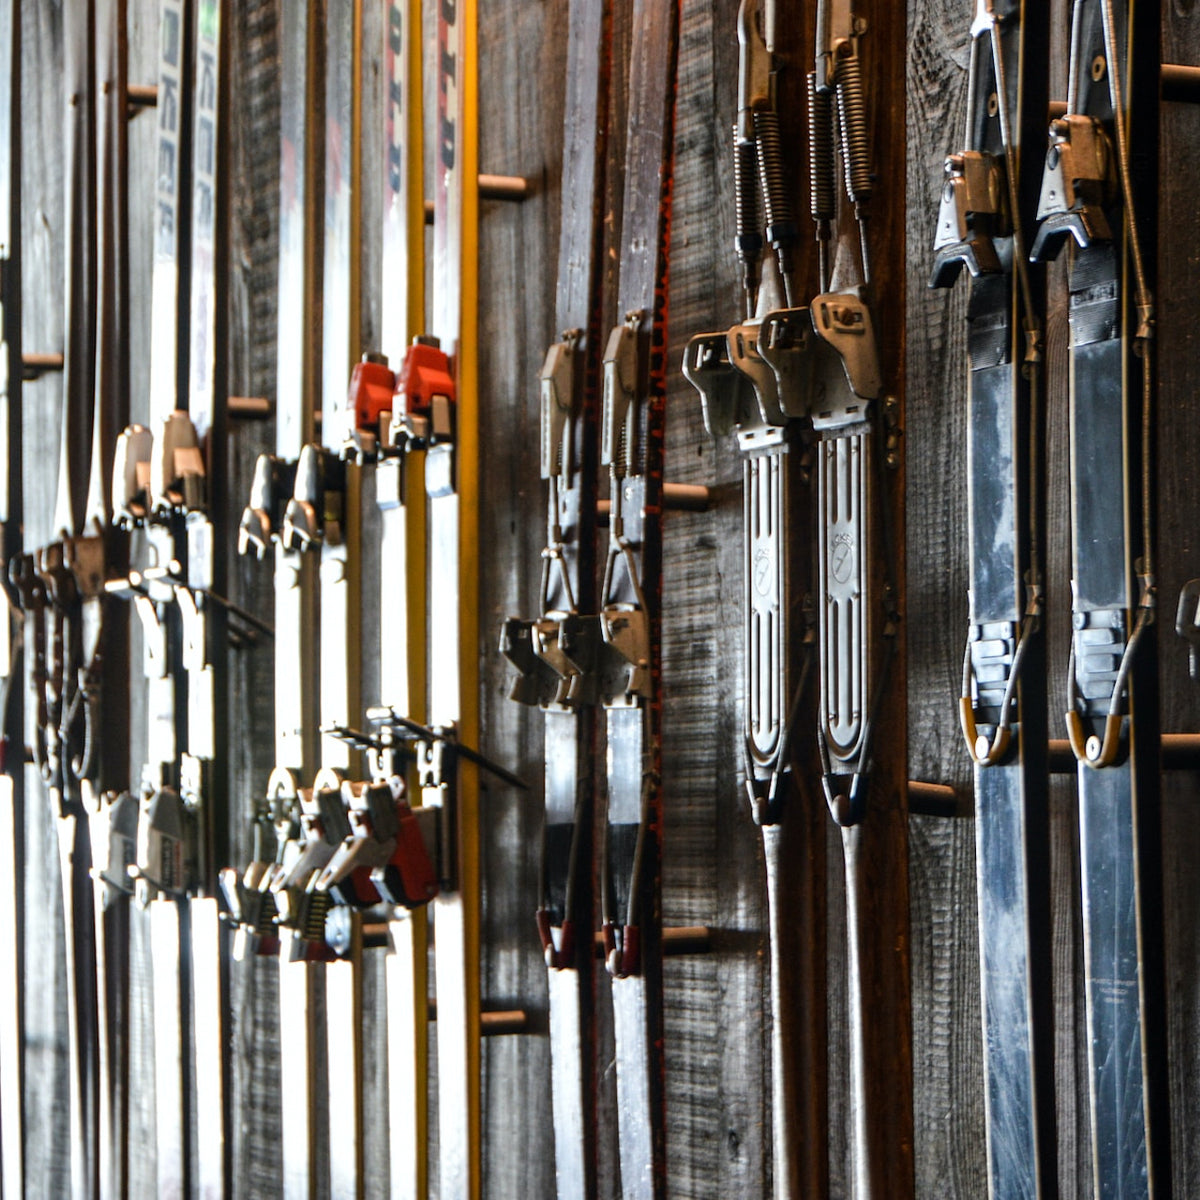 A wall of skis lined up with the bindings arranged in the center of the photo